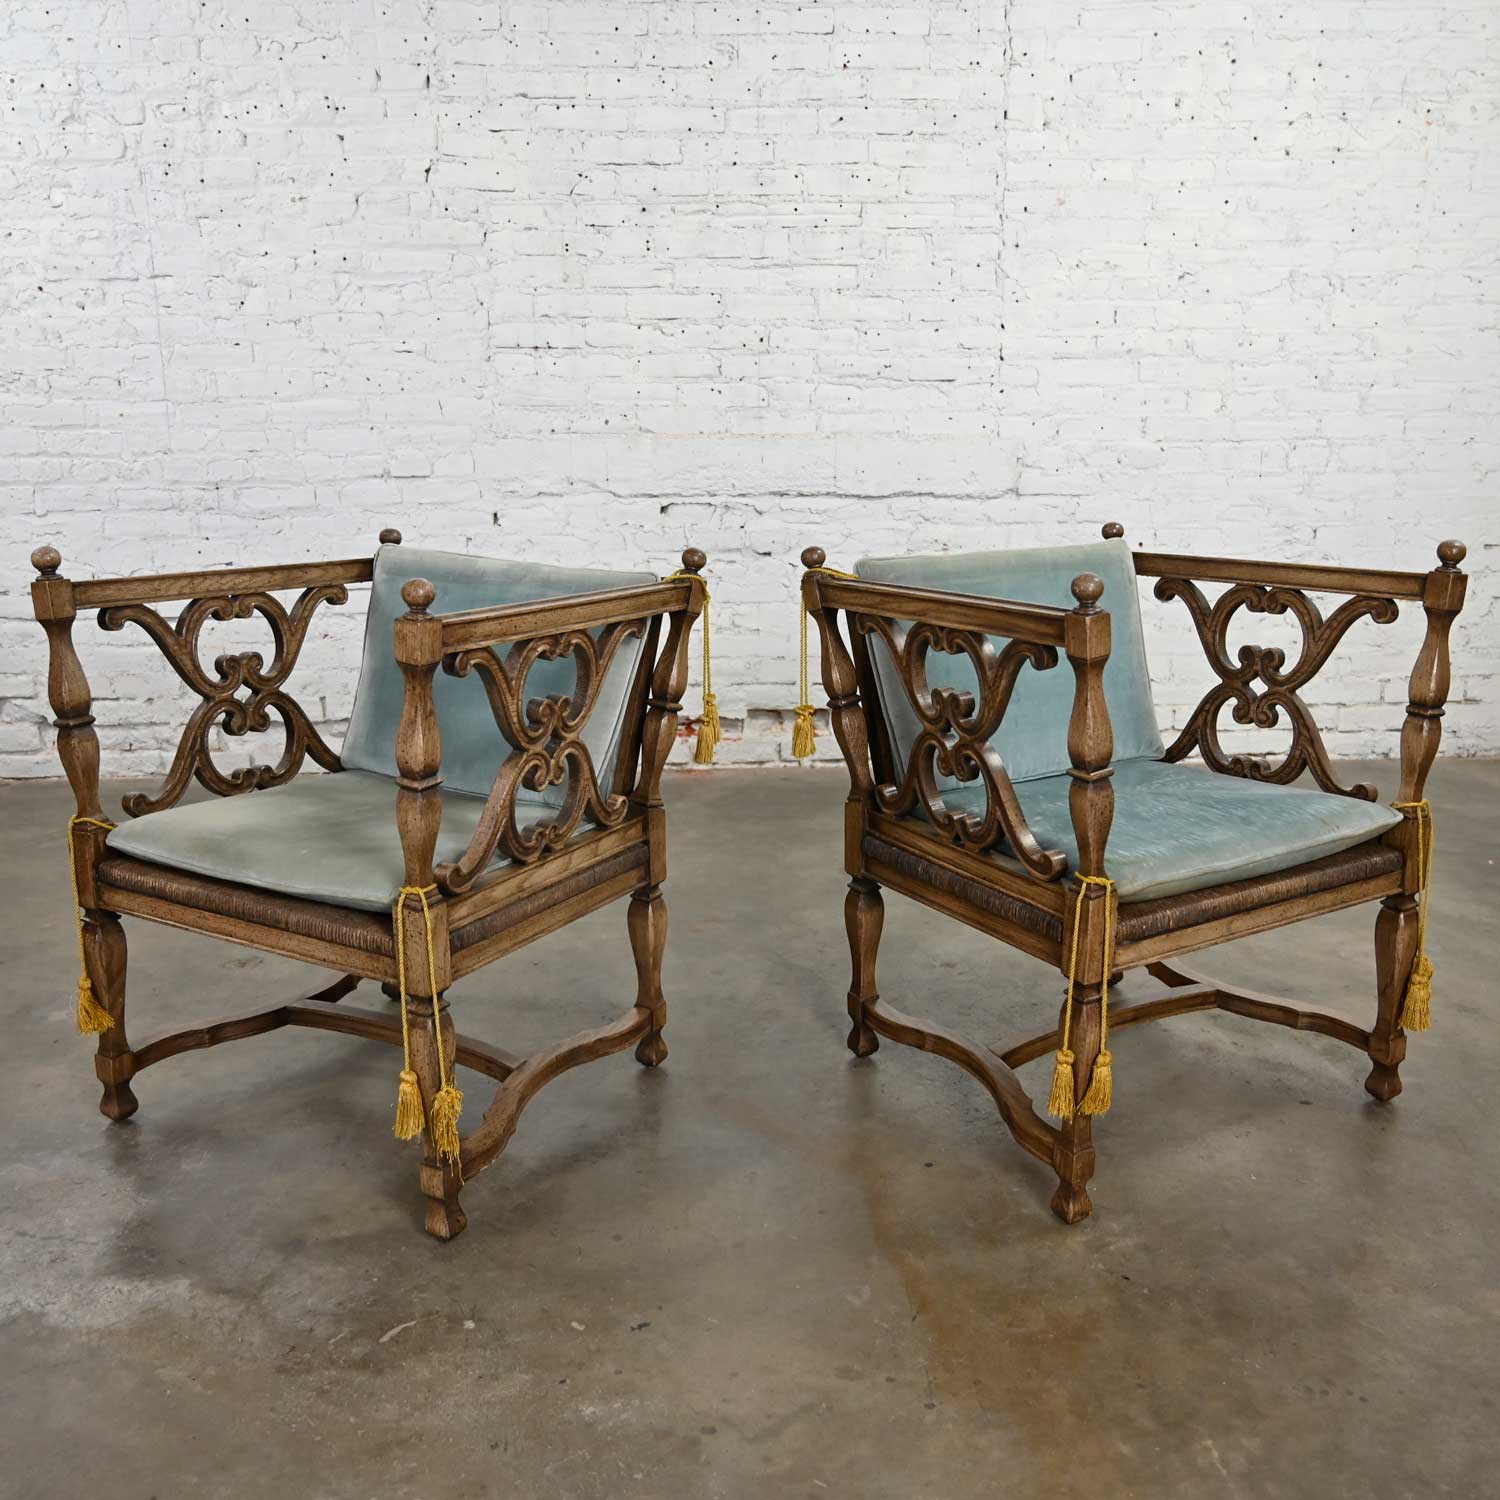 Mediterranean Spanish Revival Pair of Cerused Chairs with Rush Seats & Loose Ice Blue Velvet Cushions